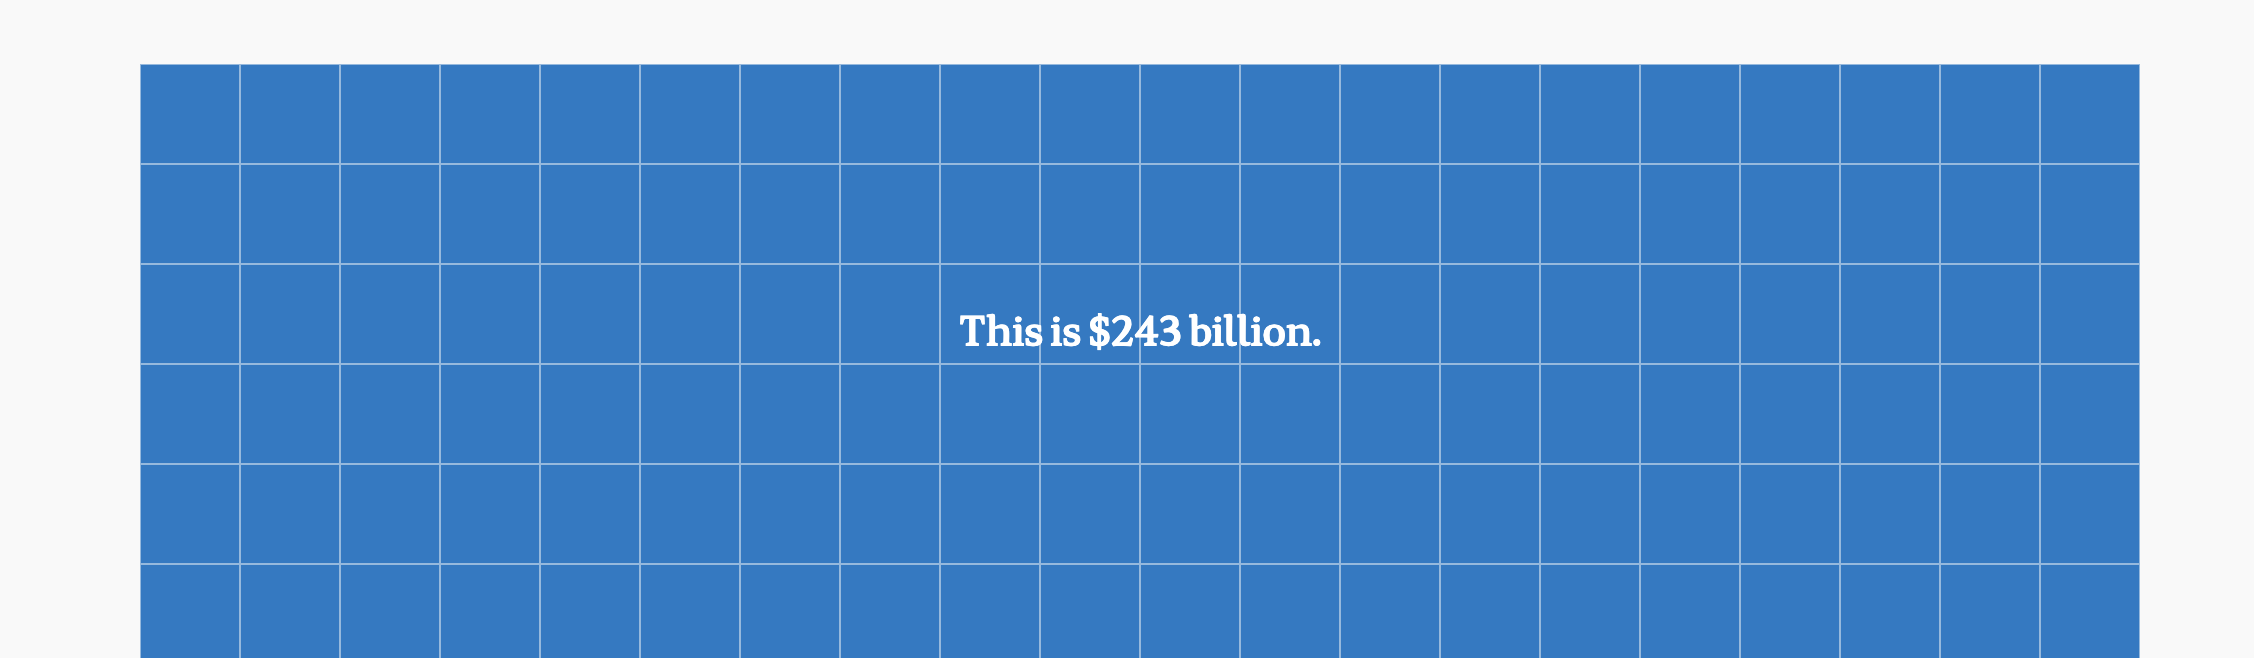 A grid of blue squares labelled "This is $243 billion".